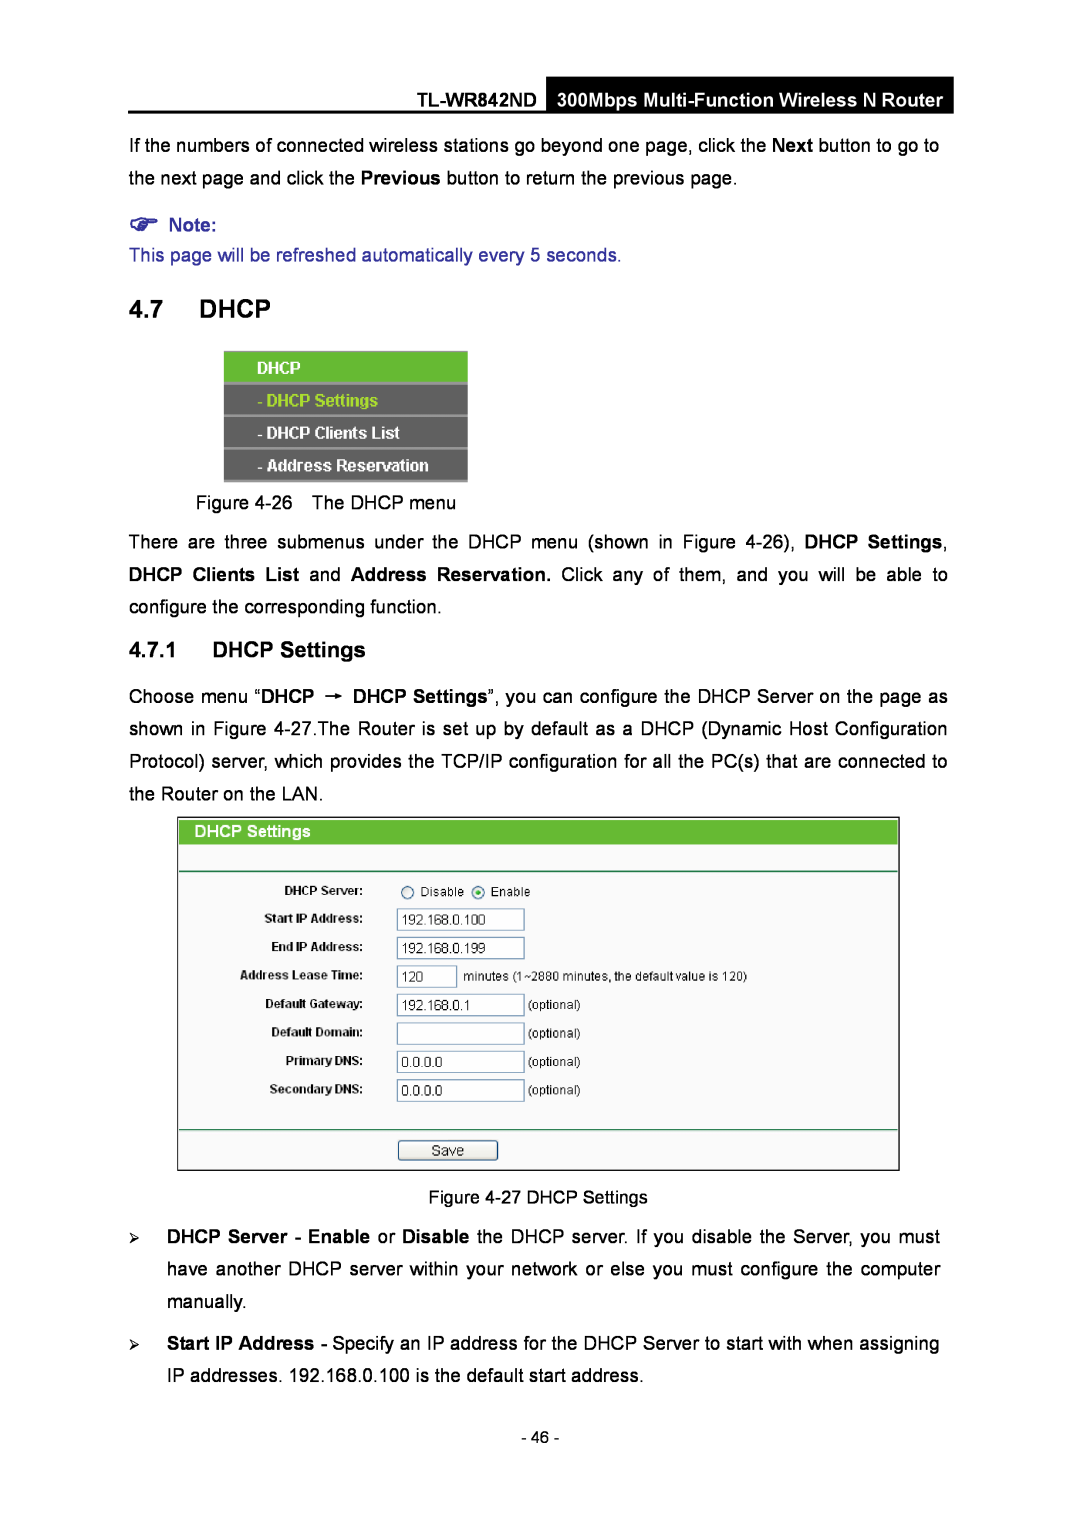 TP-Link WR-842ND manual Dhcp, DHCP Settings, This page will be refreshed automatically every 5 seconds 